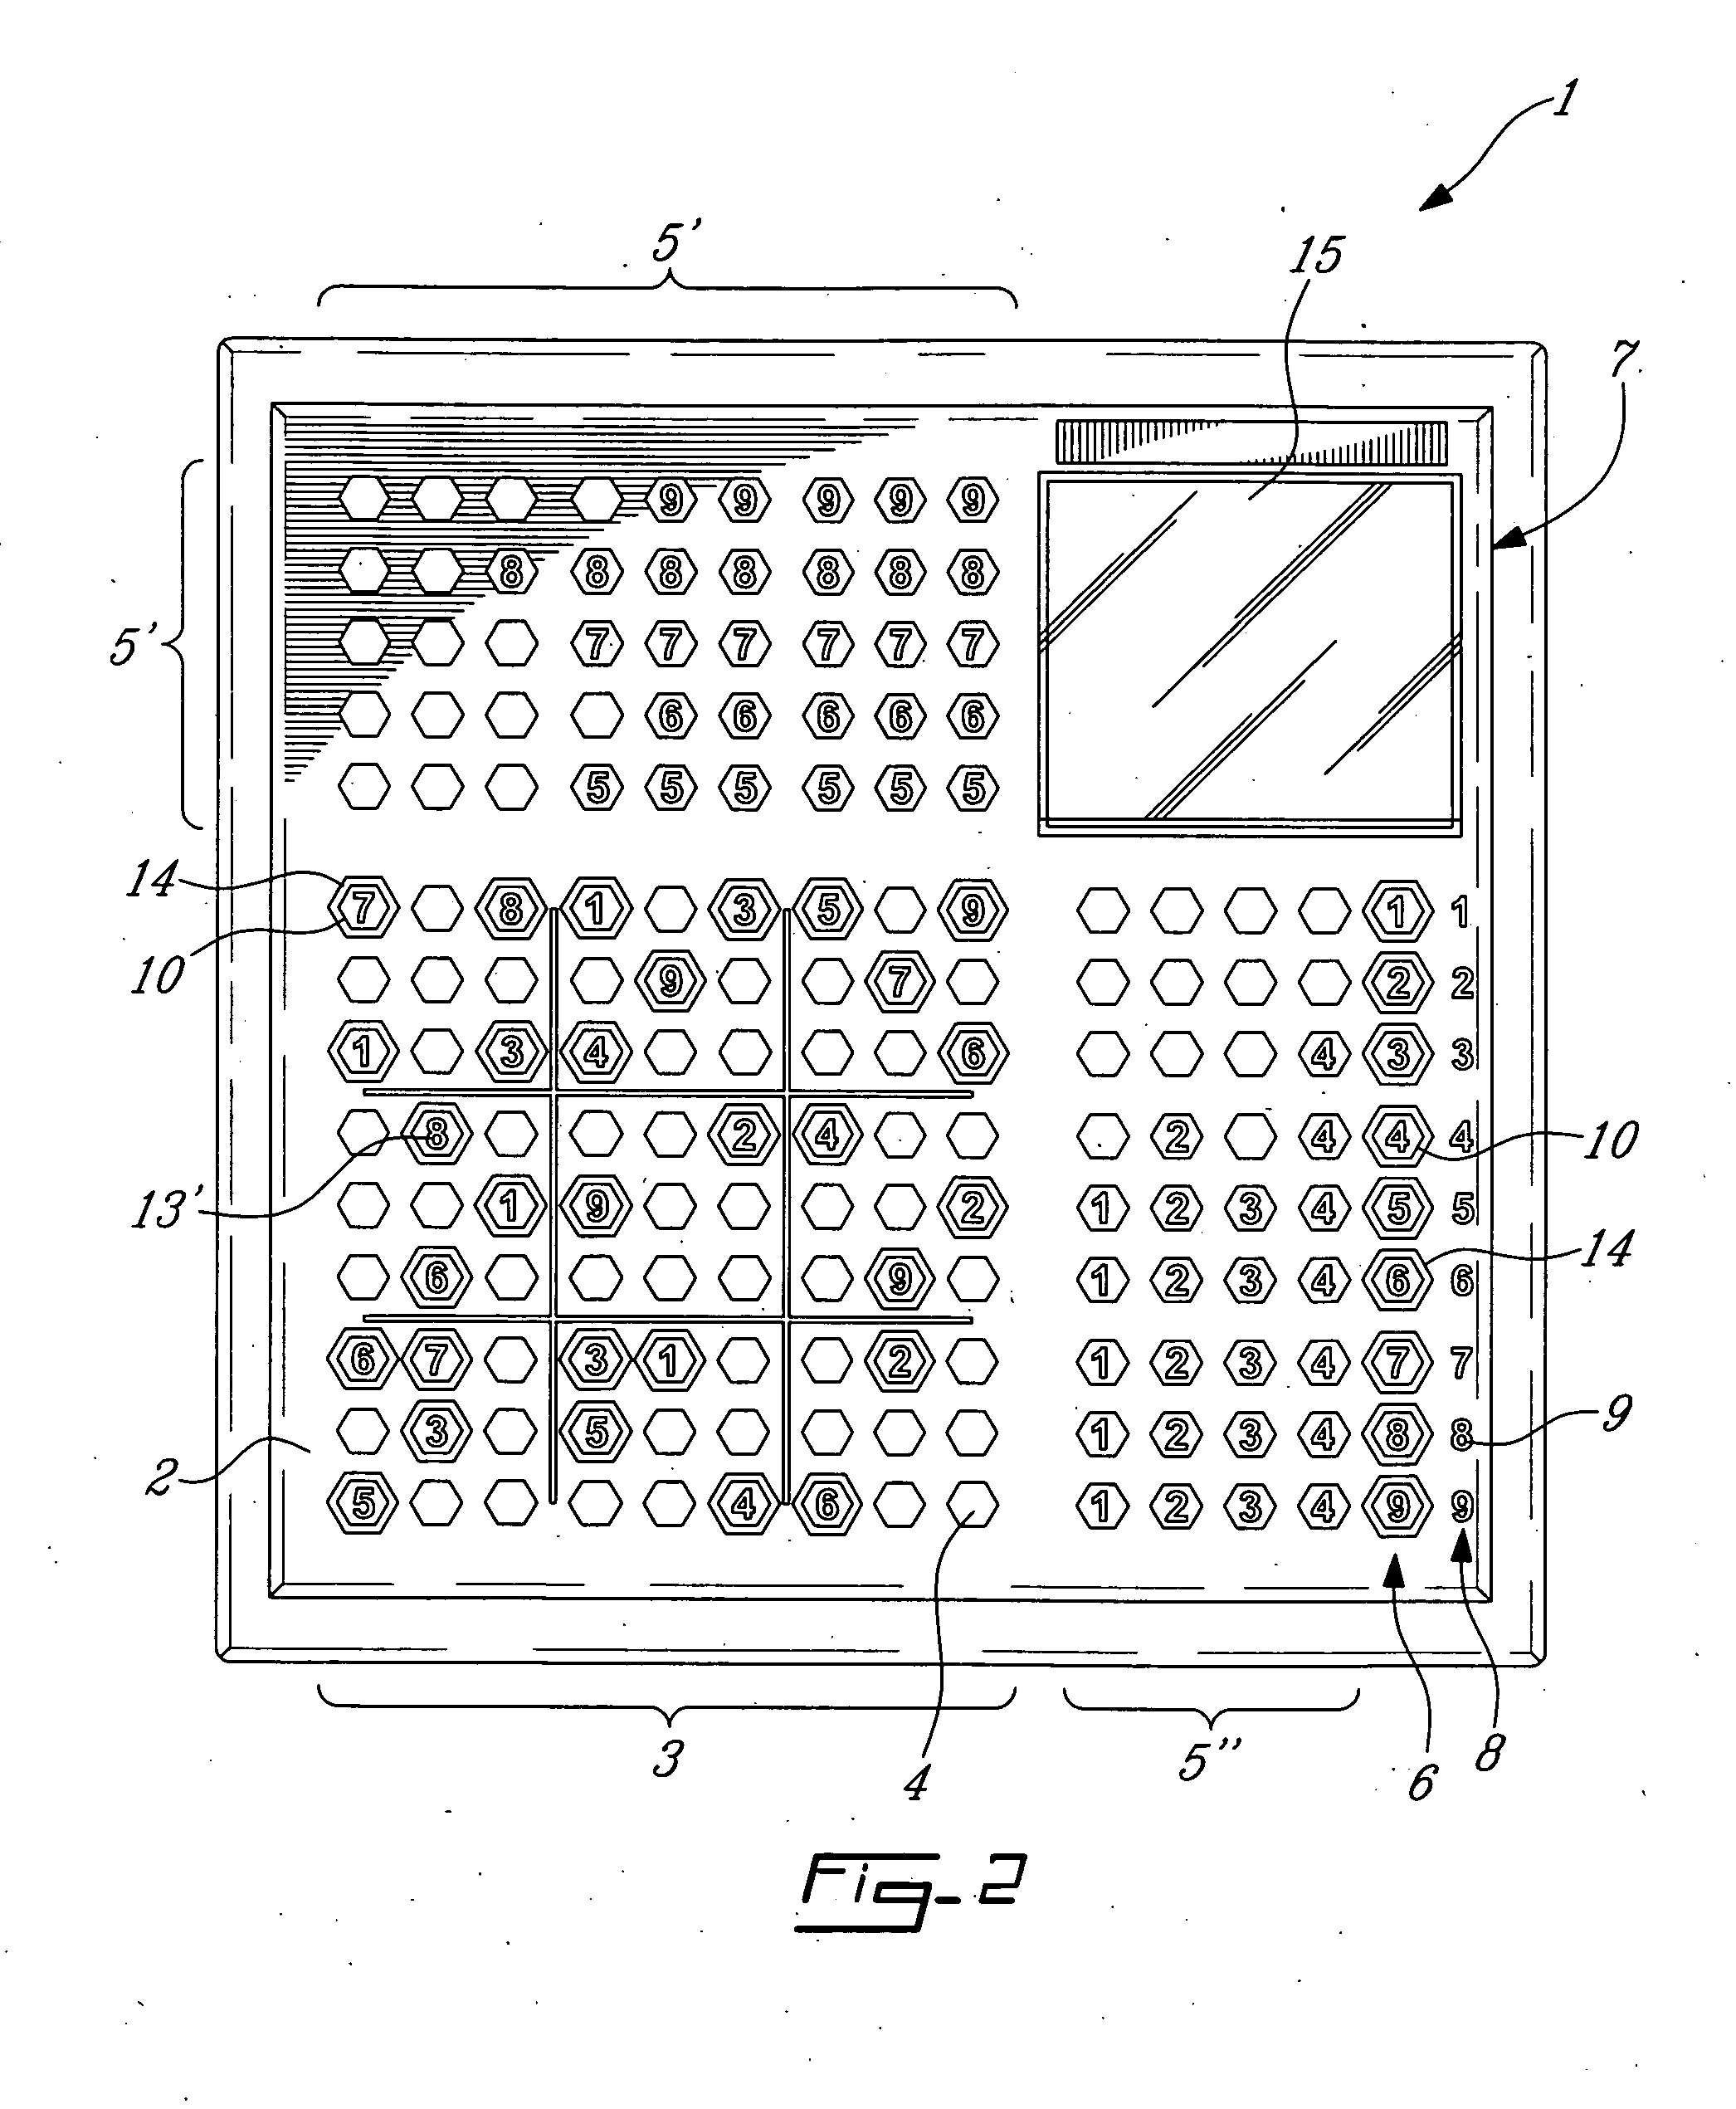 Sudoku playing board, system and method